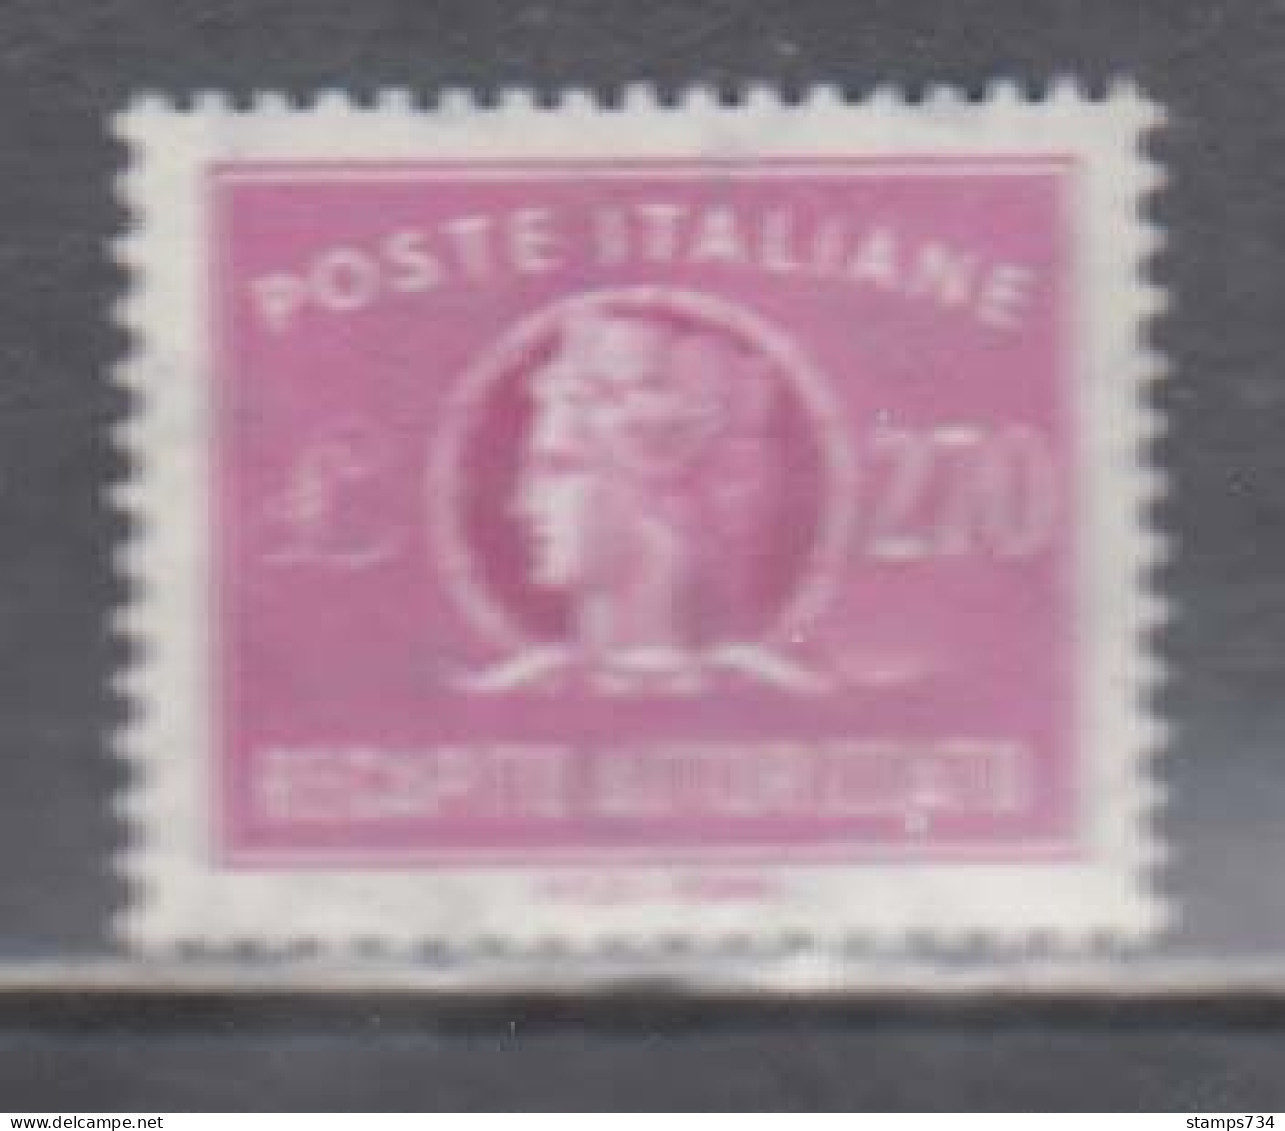 Italy 1987 - Consigned Parcels, Mi-Nr. 15, MNH** - Pacchi In Concessione